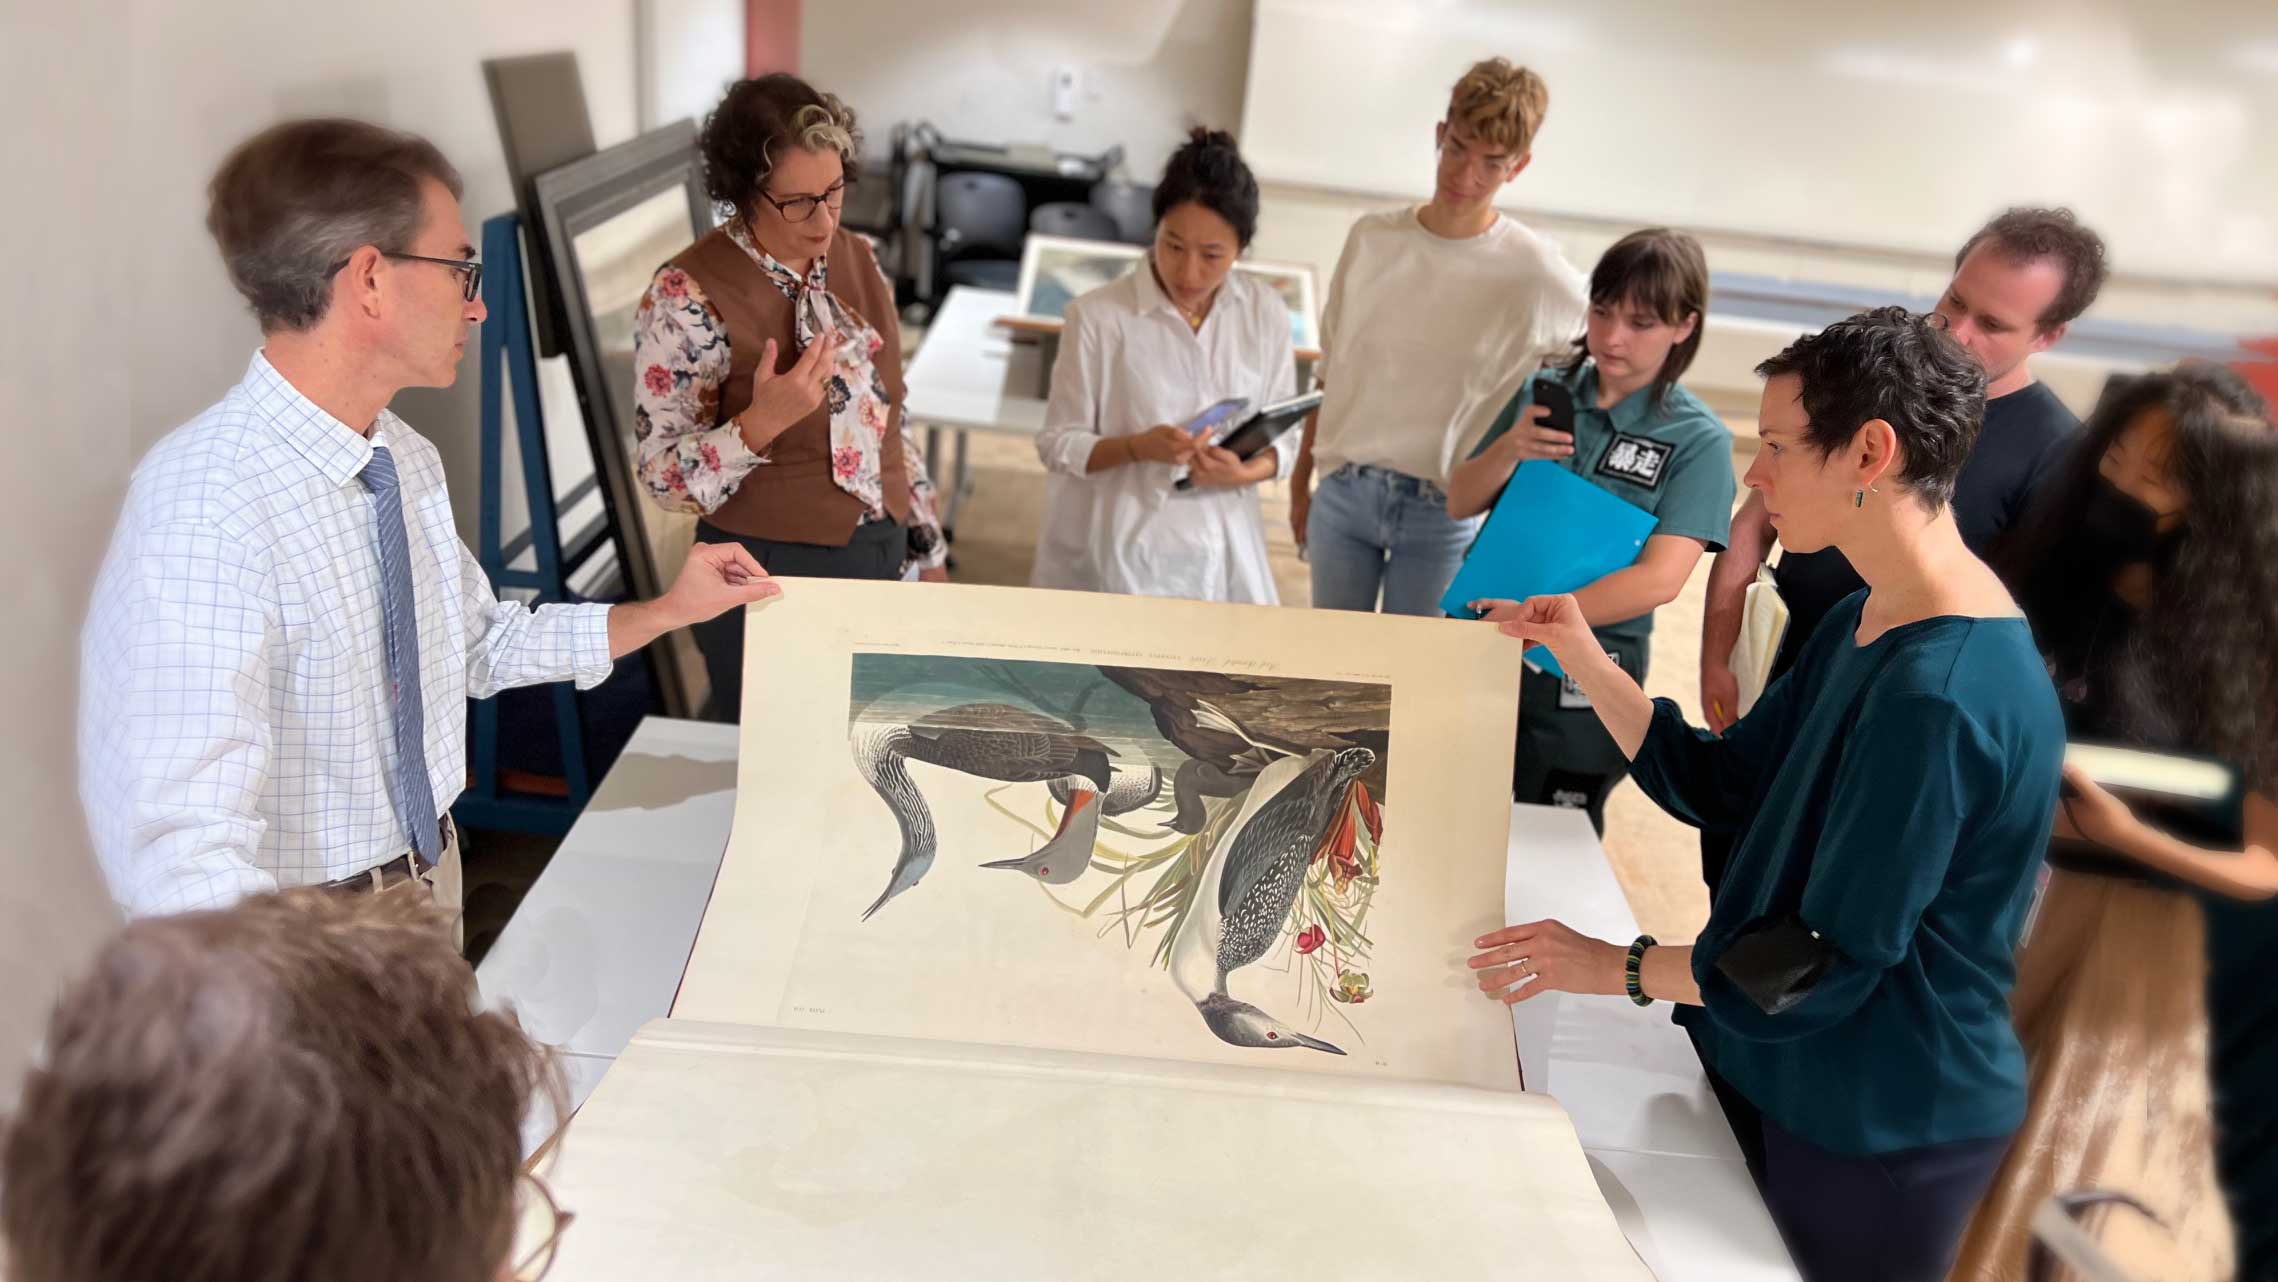 How art by Audubon, Darwin and others influenced science Insights from a Princeton course